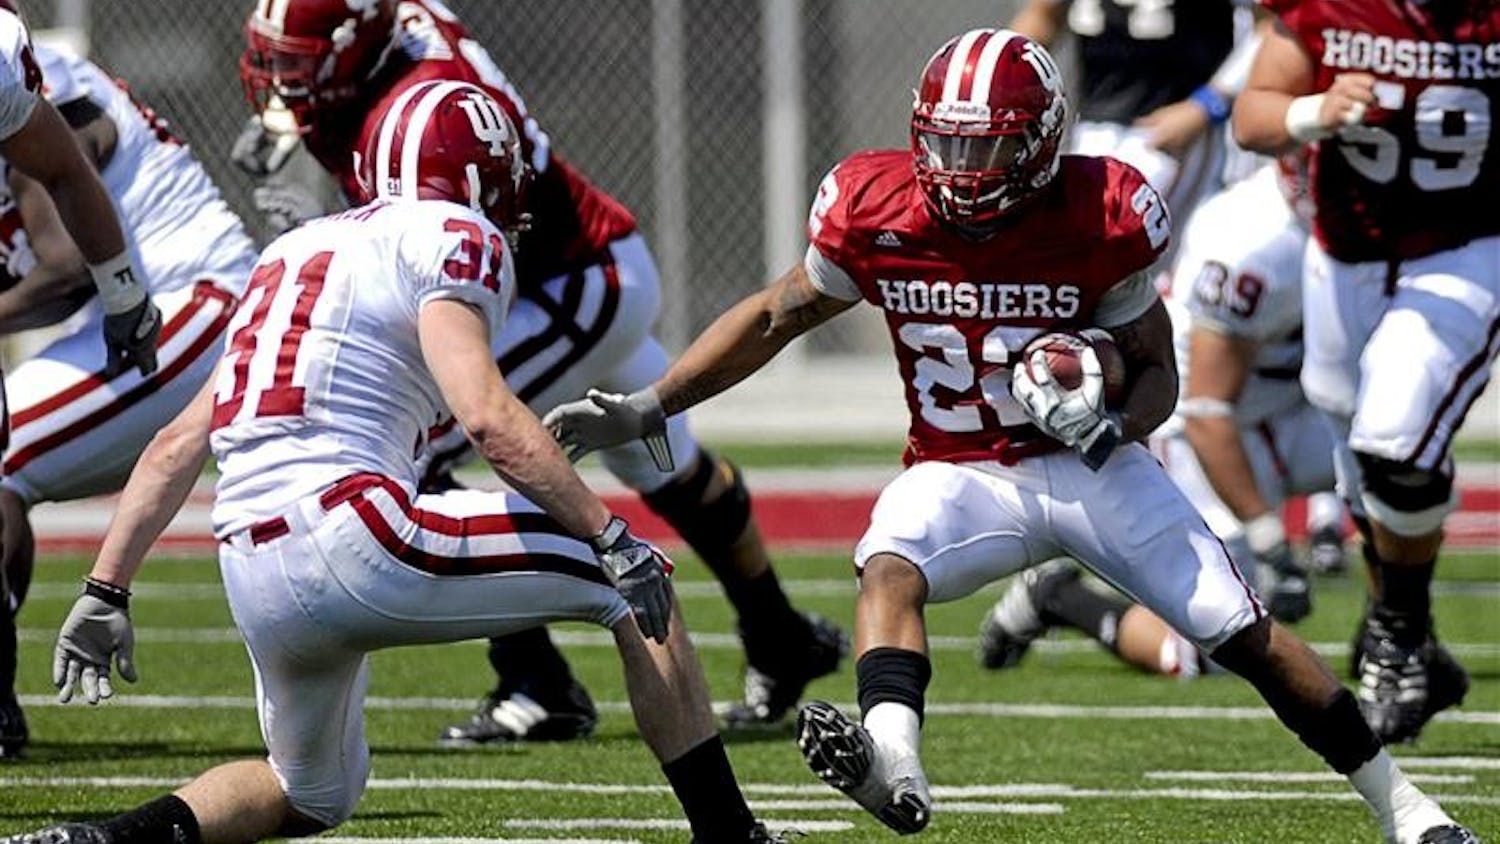 Running back Darius Willis tries to evade safety Kyle Detrick during the Spring Game on Saturday afternoon at Memorial Stadium. The Crimson team won 28-27.